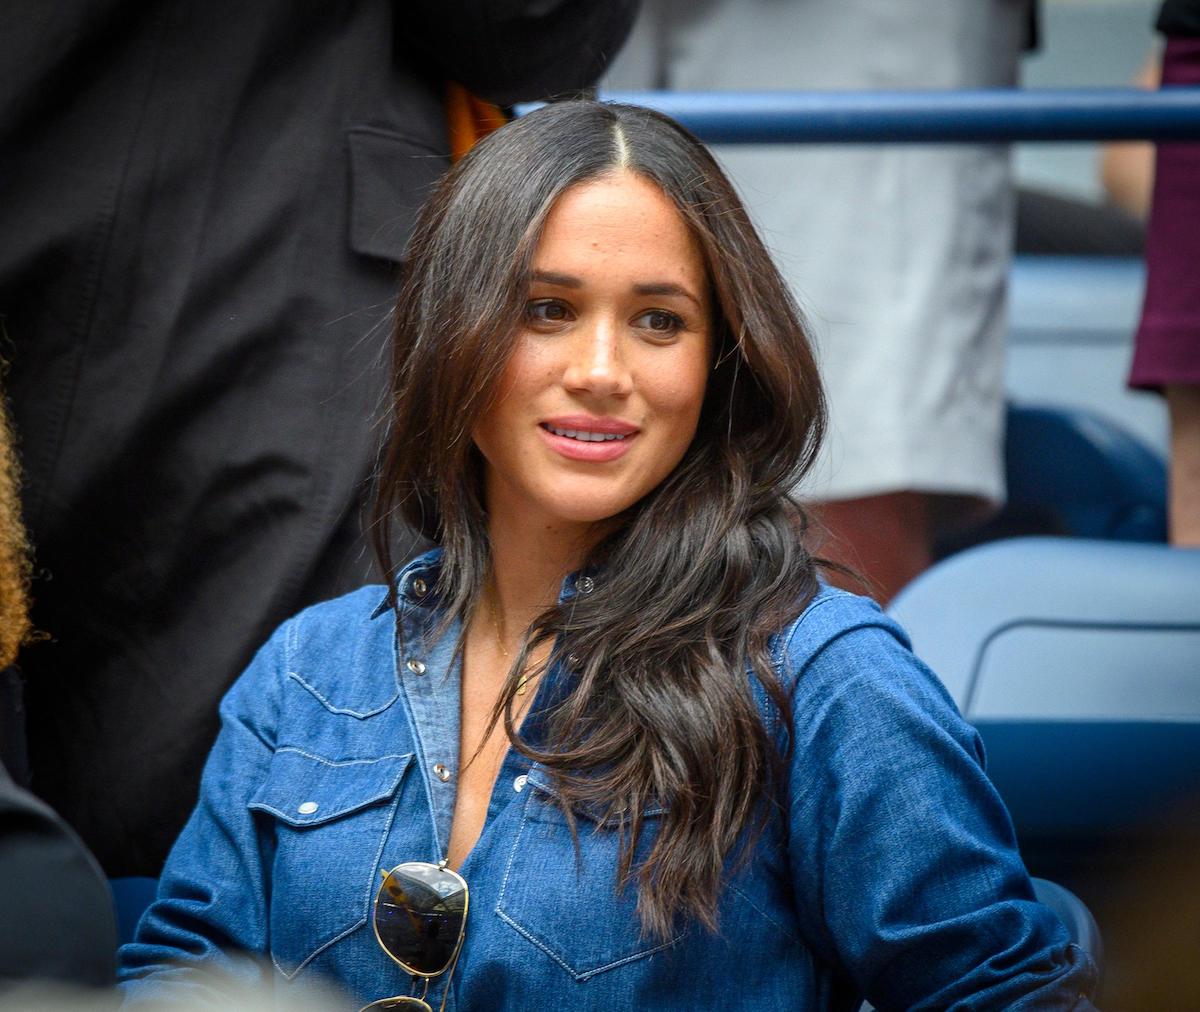 Meghan Markle wearing a blue shirt in the audience of sports match